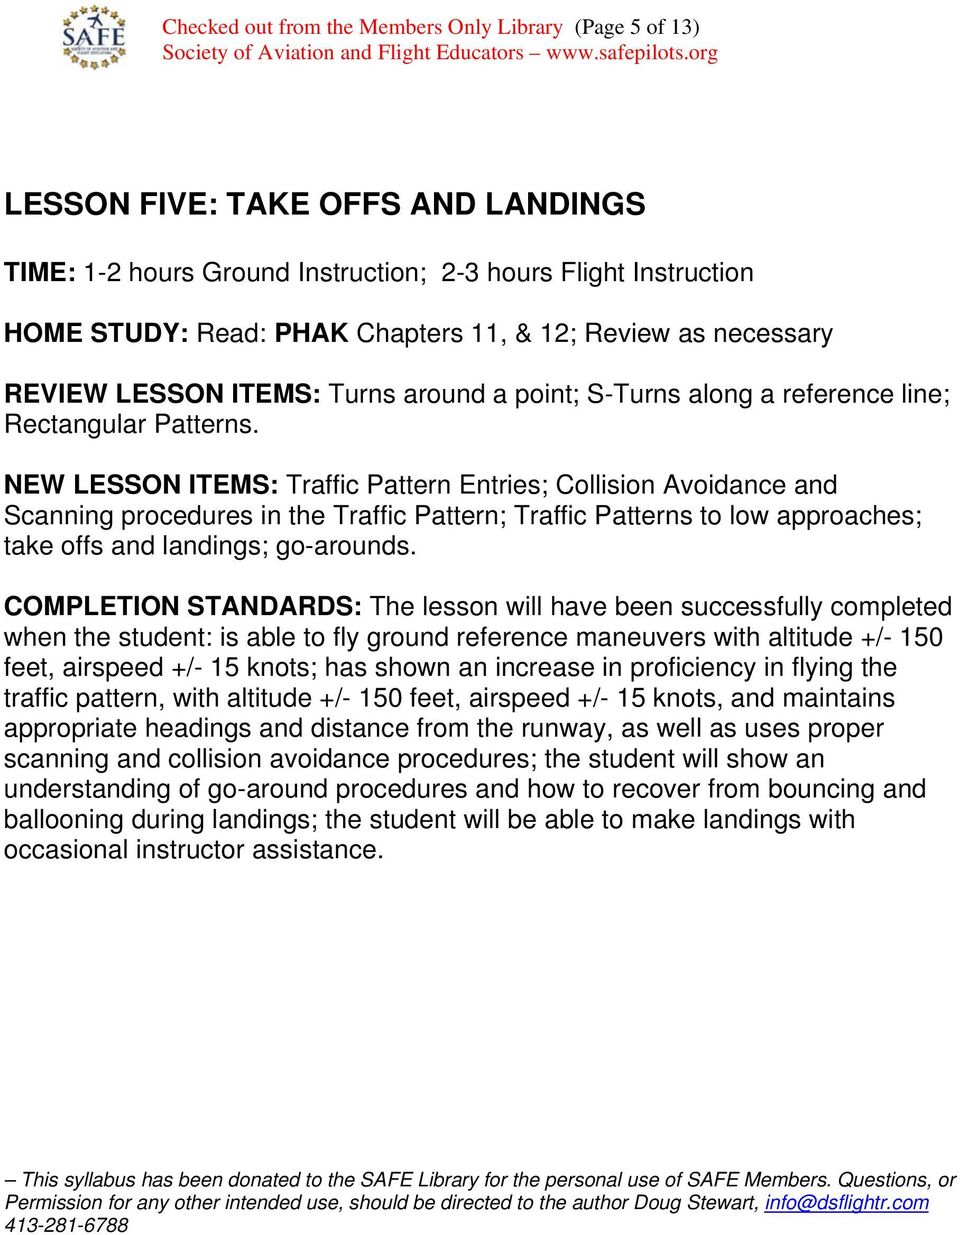 NEW LESSON ITEMS: Traffic Pattern Entries; Collision Avoidance and Scanning procedures in the Traffic Pattern; Traffic Patterns to low approaches; take offs and landings; go-arounds.